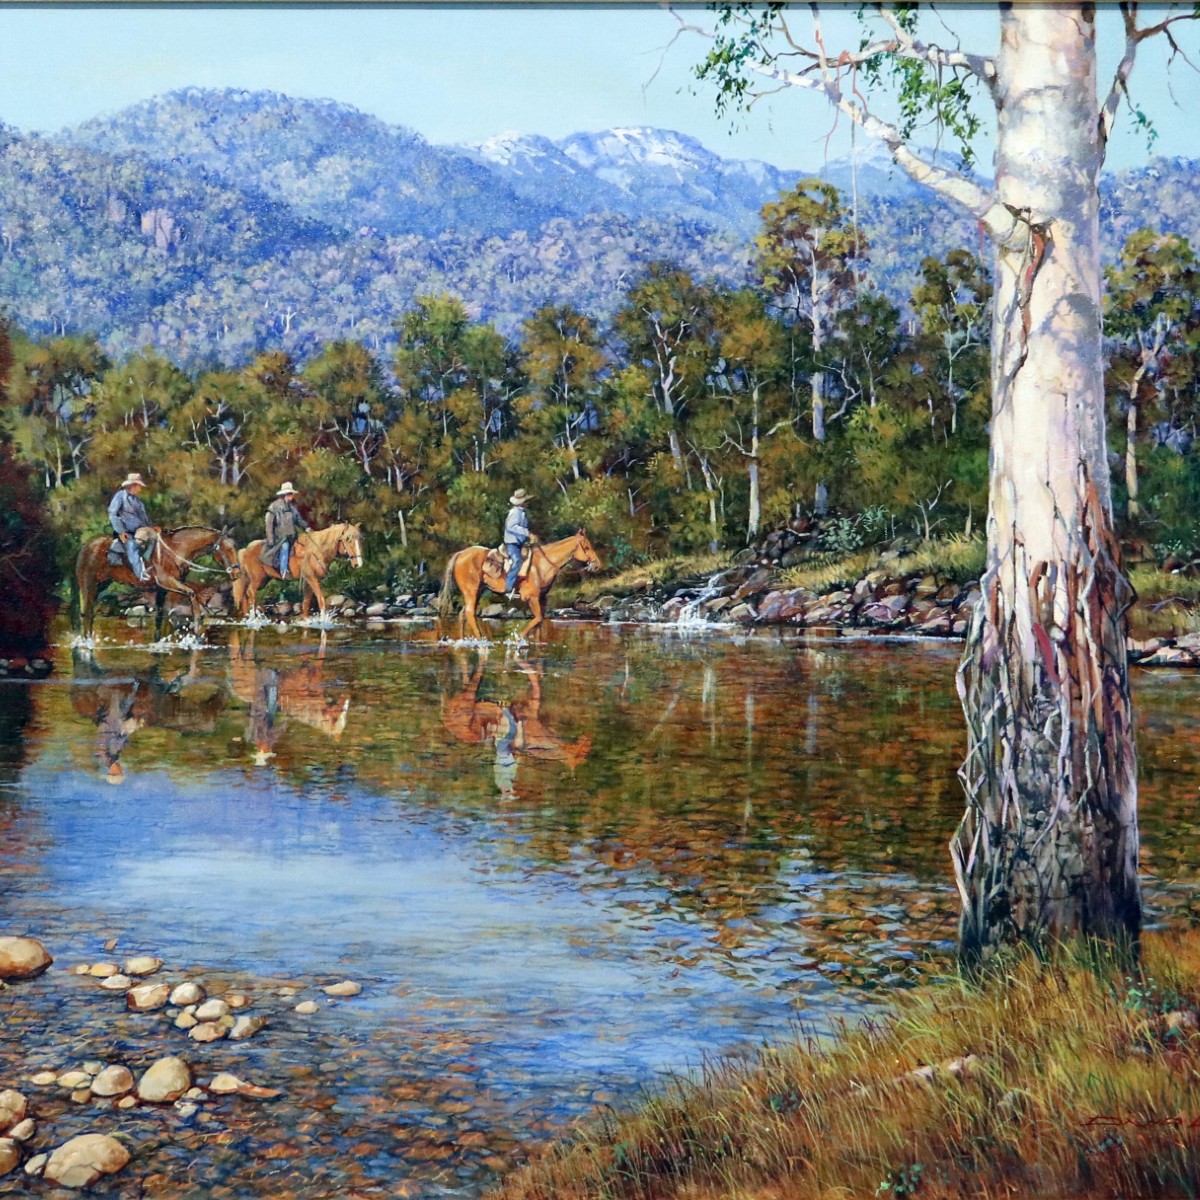 Image 2012 Peoples Choice David Byard - Down from the High Country